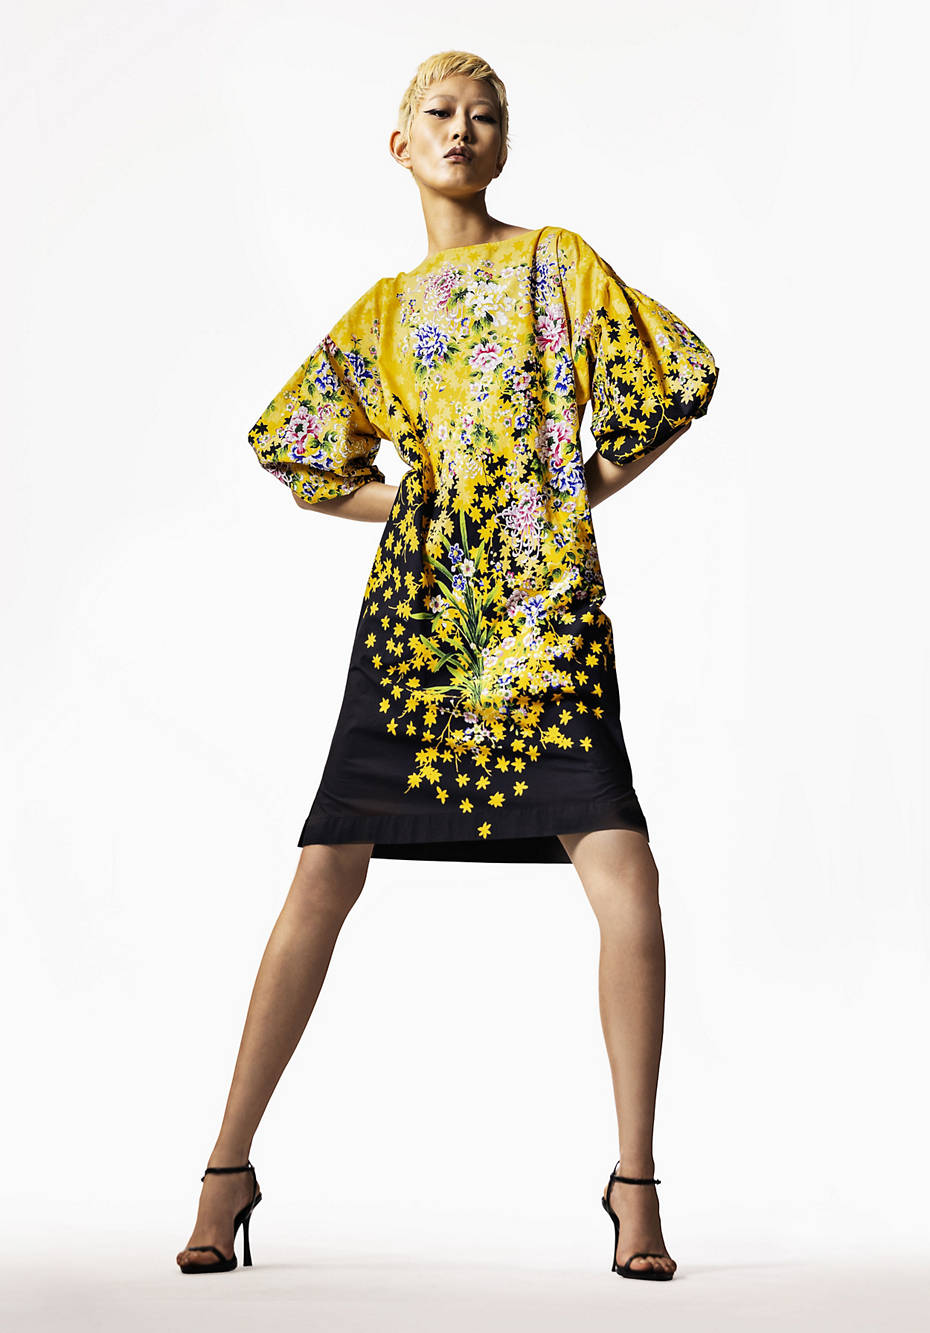 WUNDERKIND X HESSNATUR Oversized dress with a kimono print made from pure organic cotton